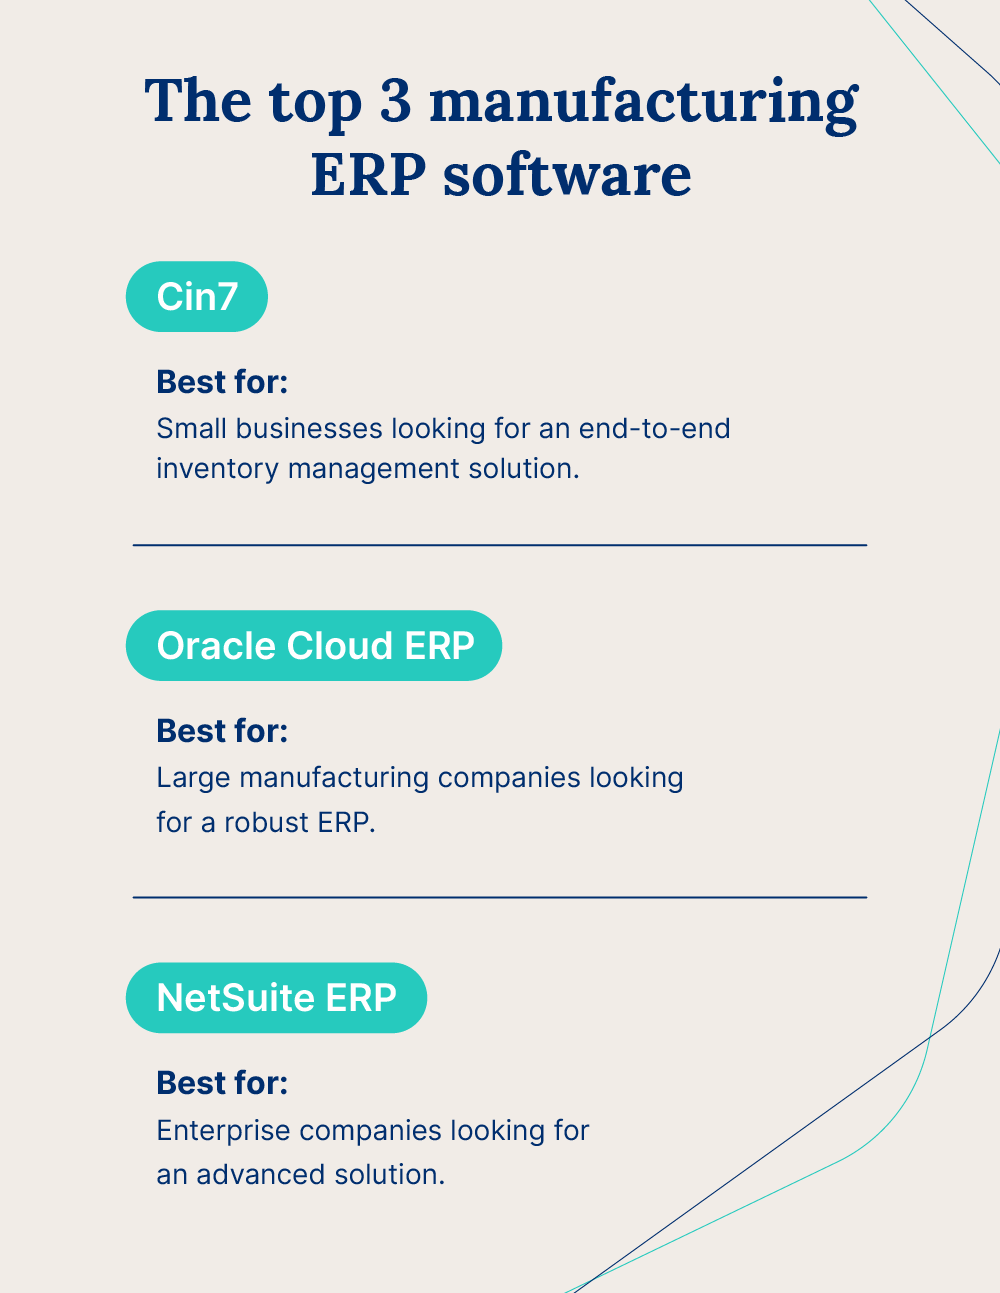 A list of the three best manufacturing ERP software and who they’re best for.